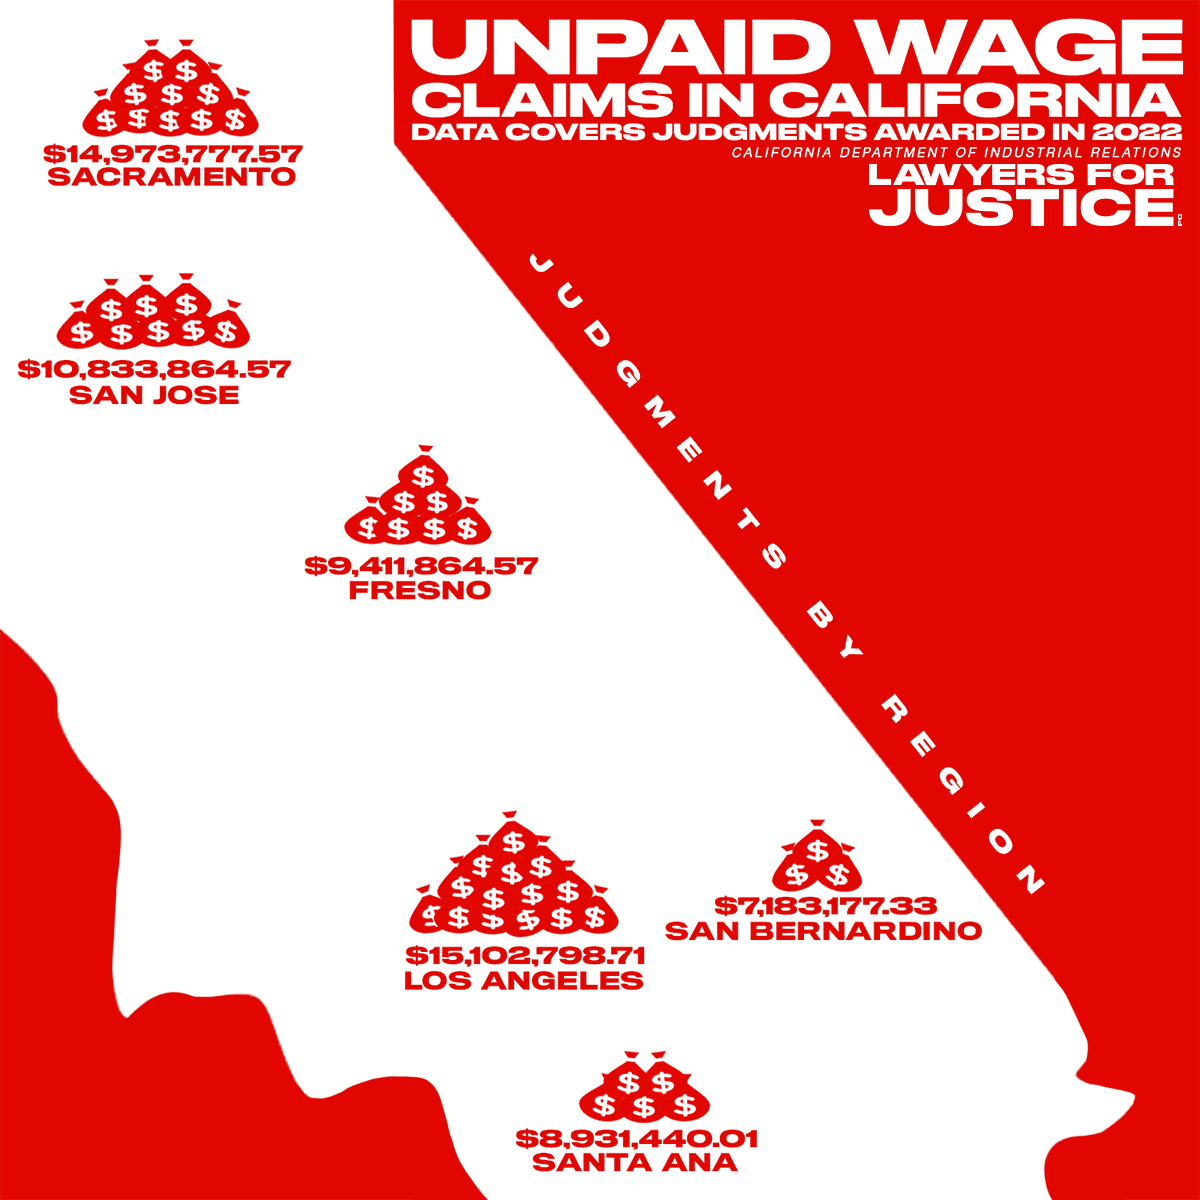 Unpaid Wage Claims in California 